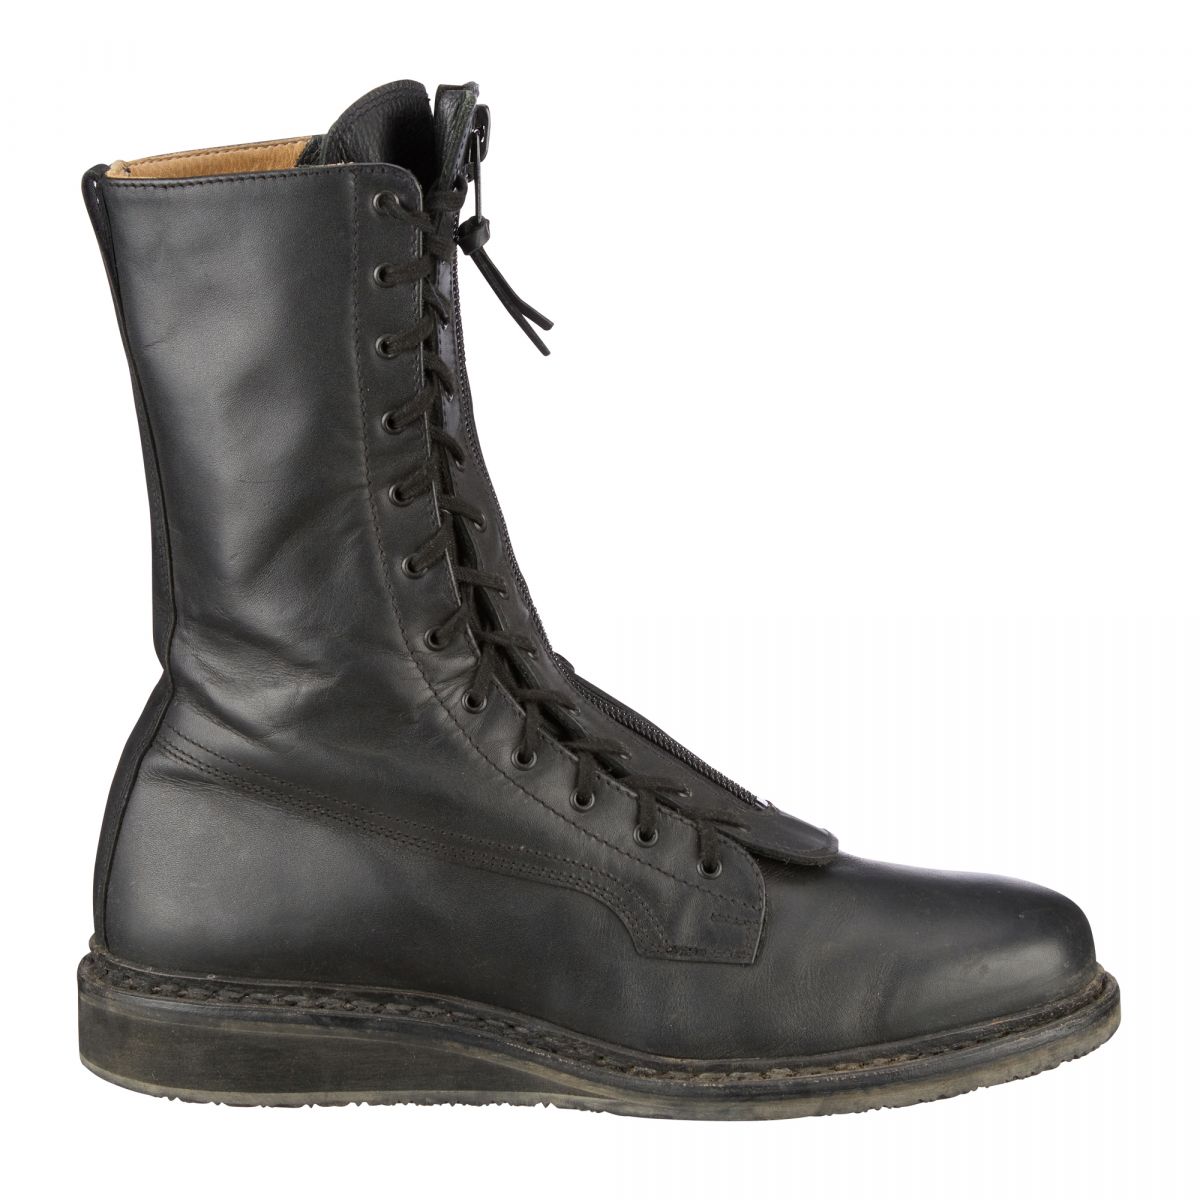 Purchase the Used BW Pilot Boots by ASMC